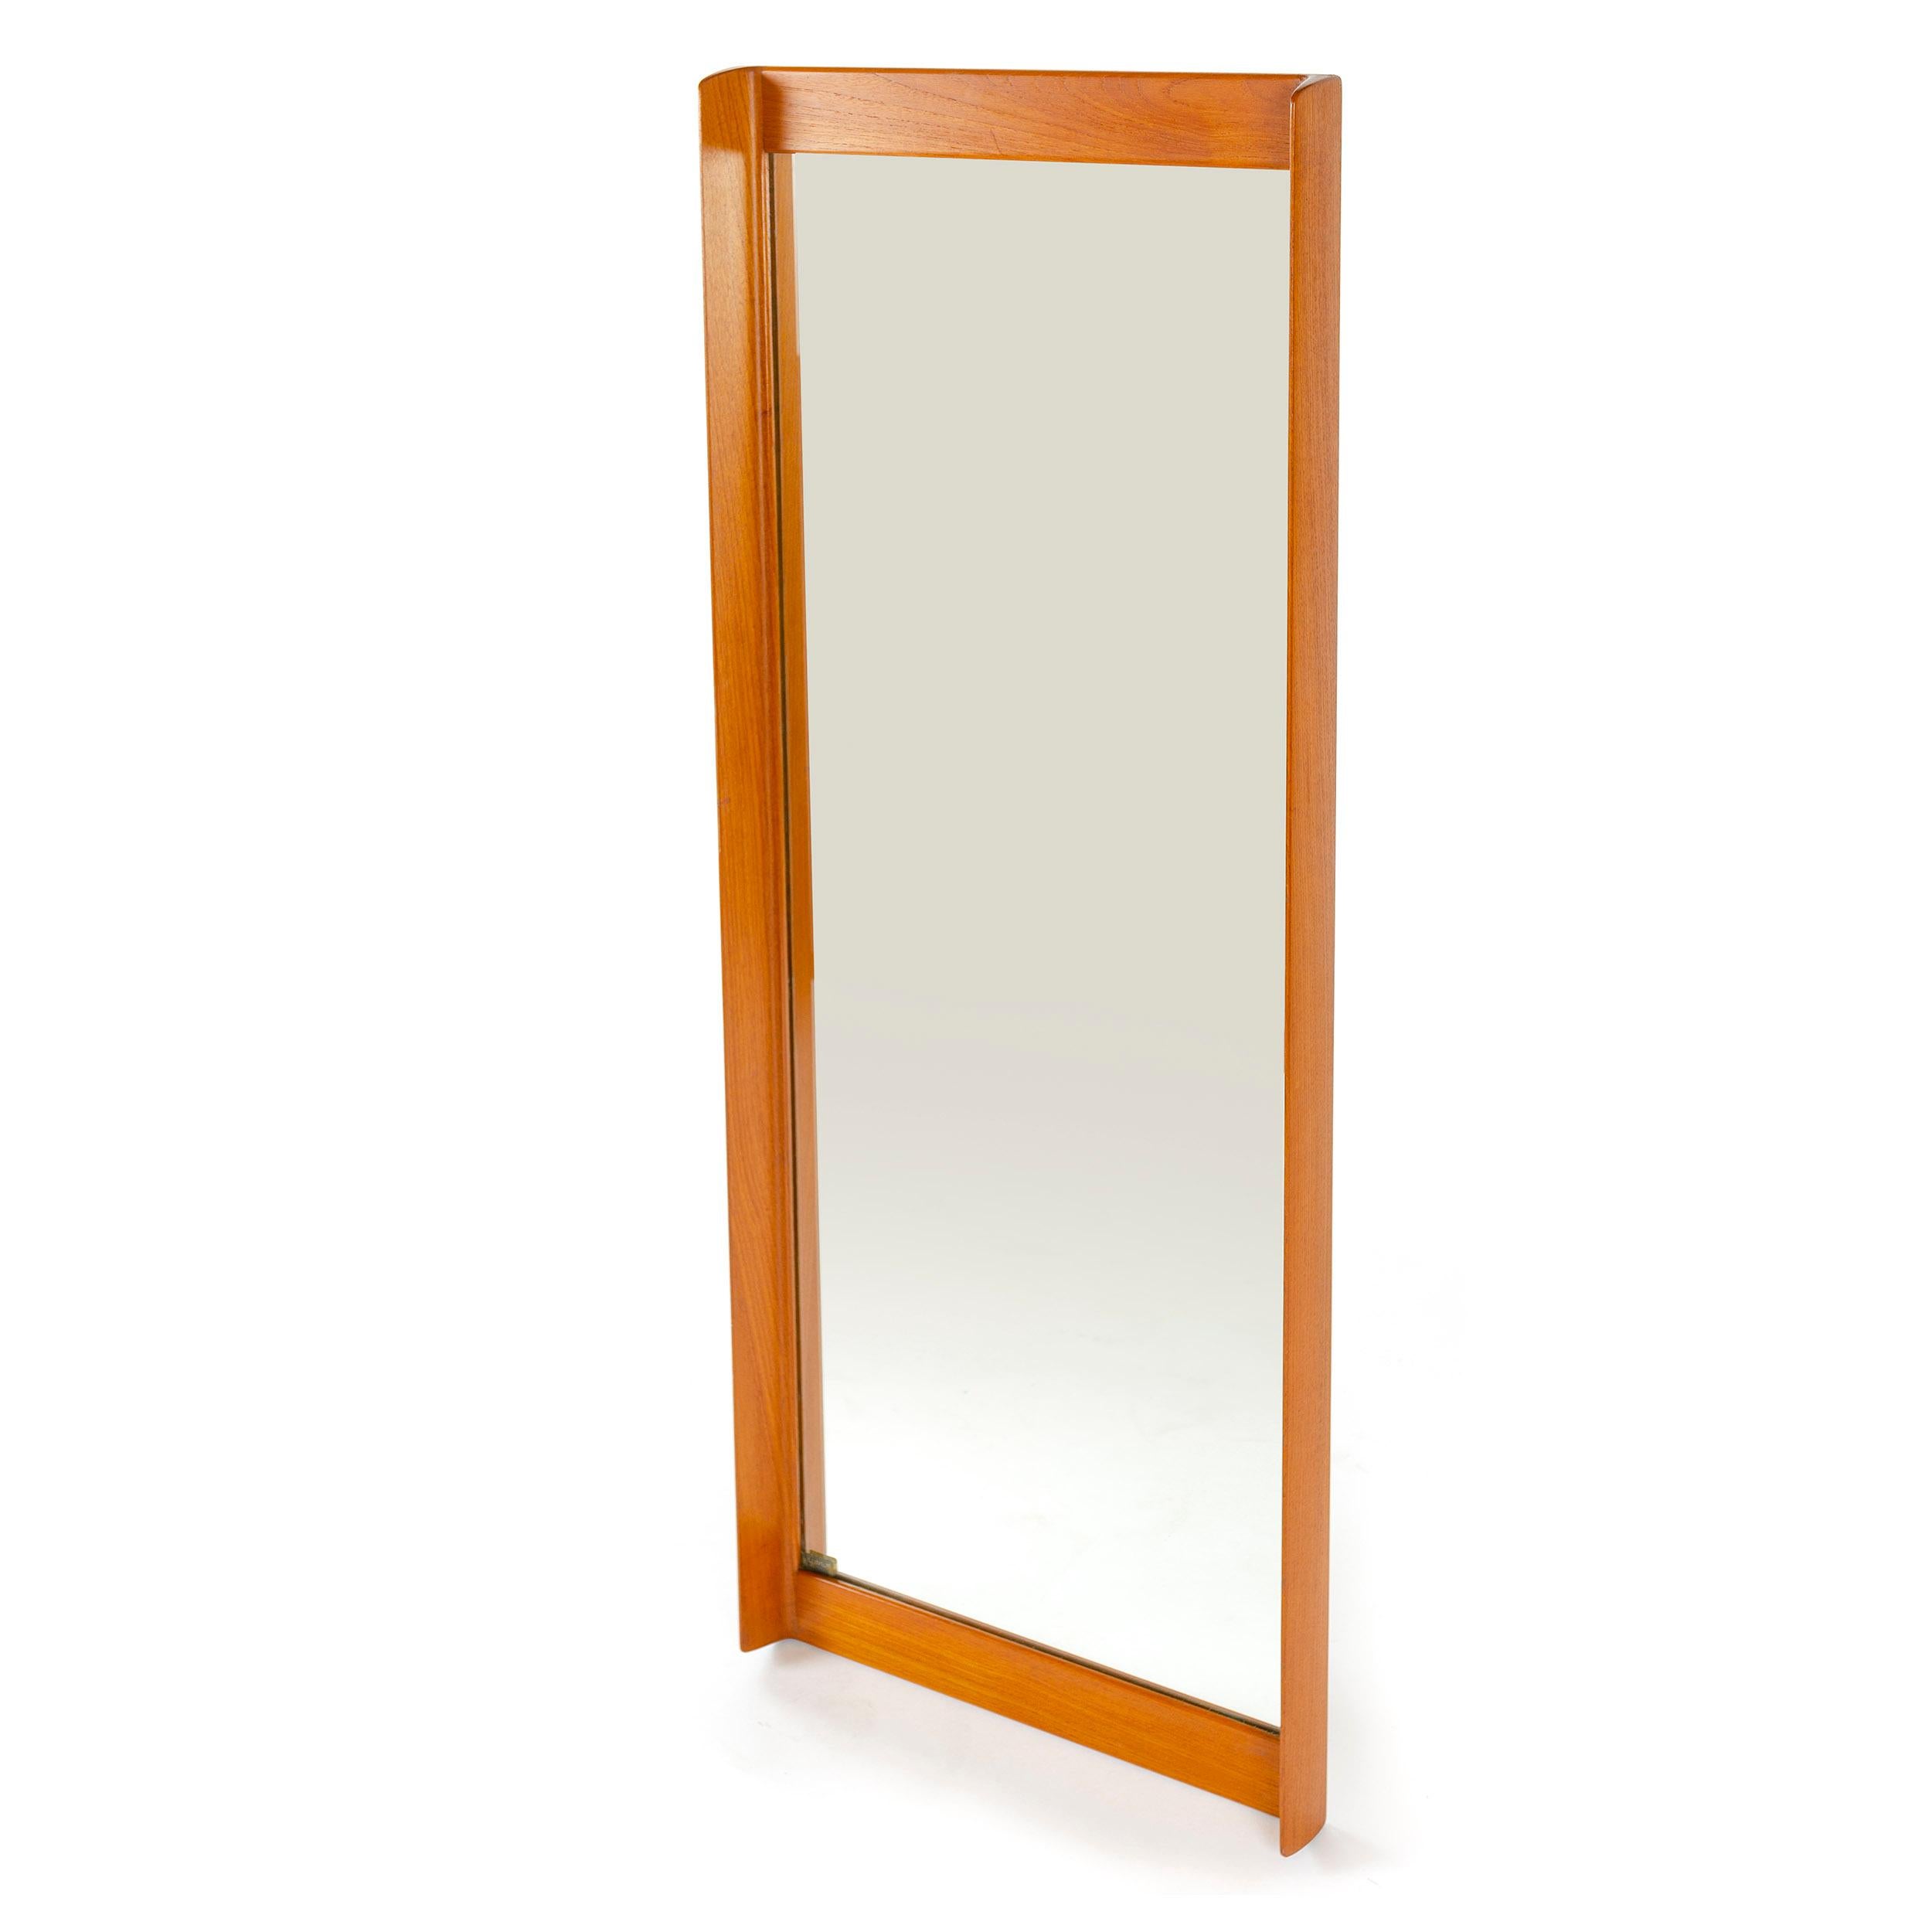 An elegant wall mirror manufactured in Sweden with a handcrafted teak-frame with bowed sides and original glass.